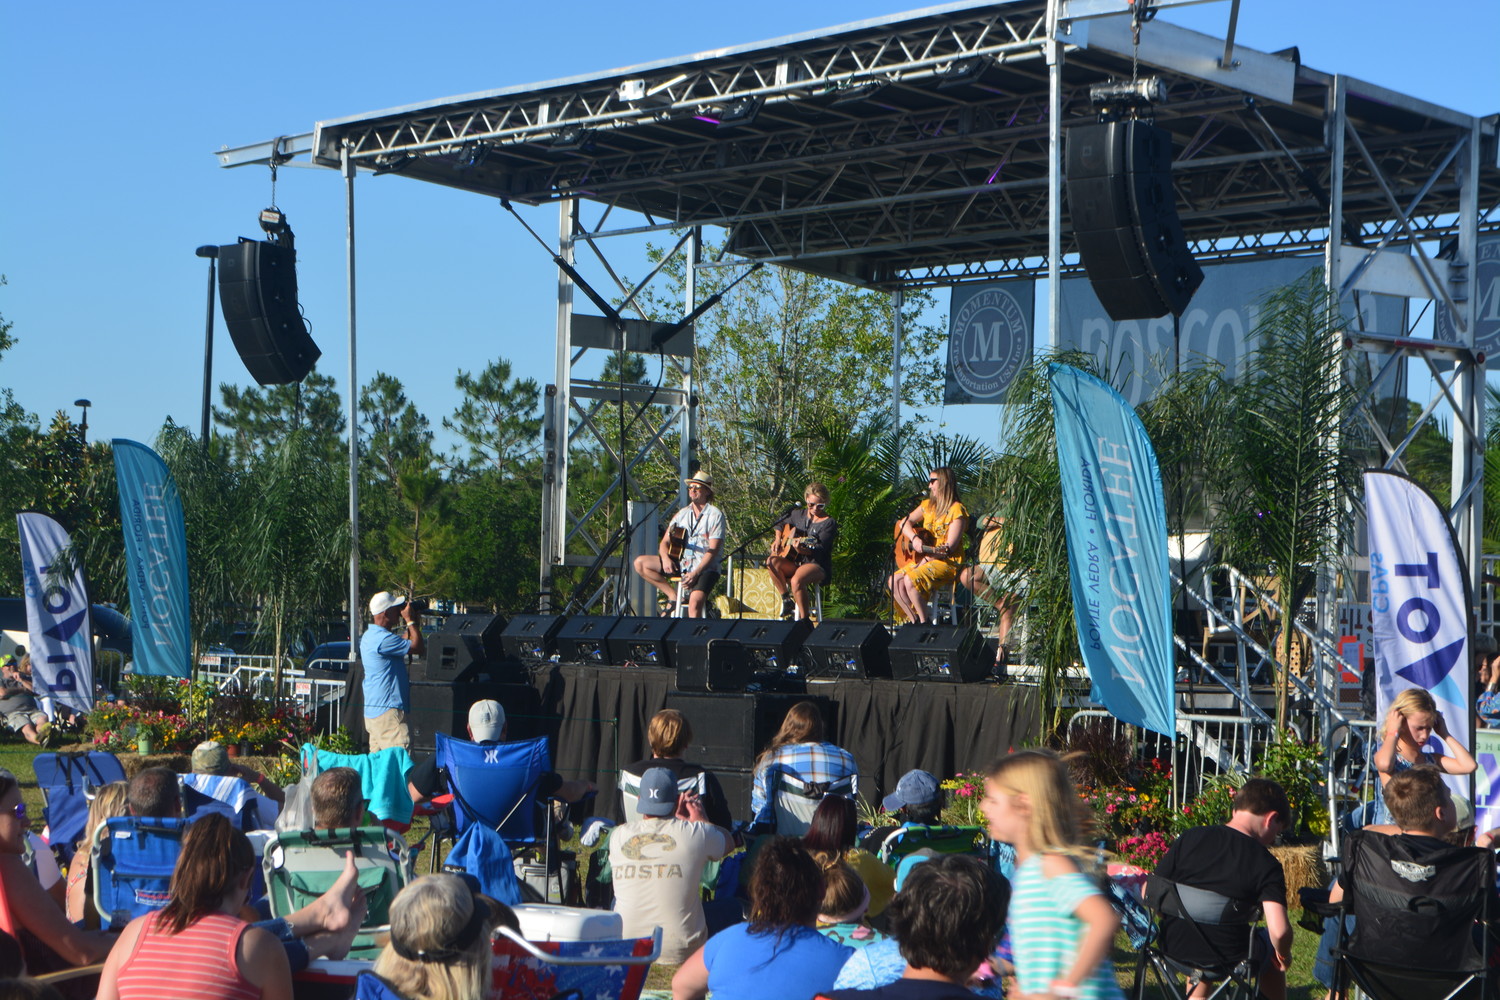 Songwriters share their stories and perform popular songs on-stage at the 2018 Roscolusa Songwriters Festival, held April 28 in Nocatee.